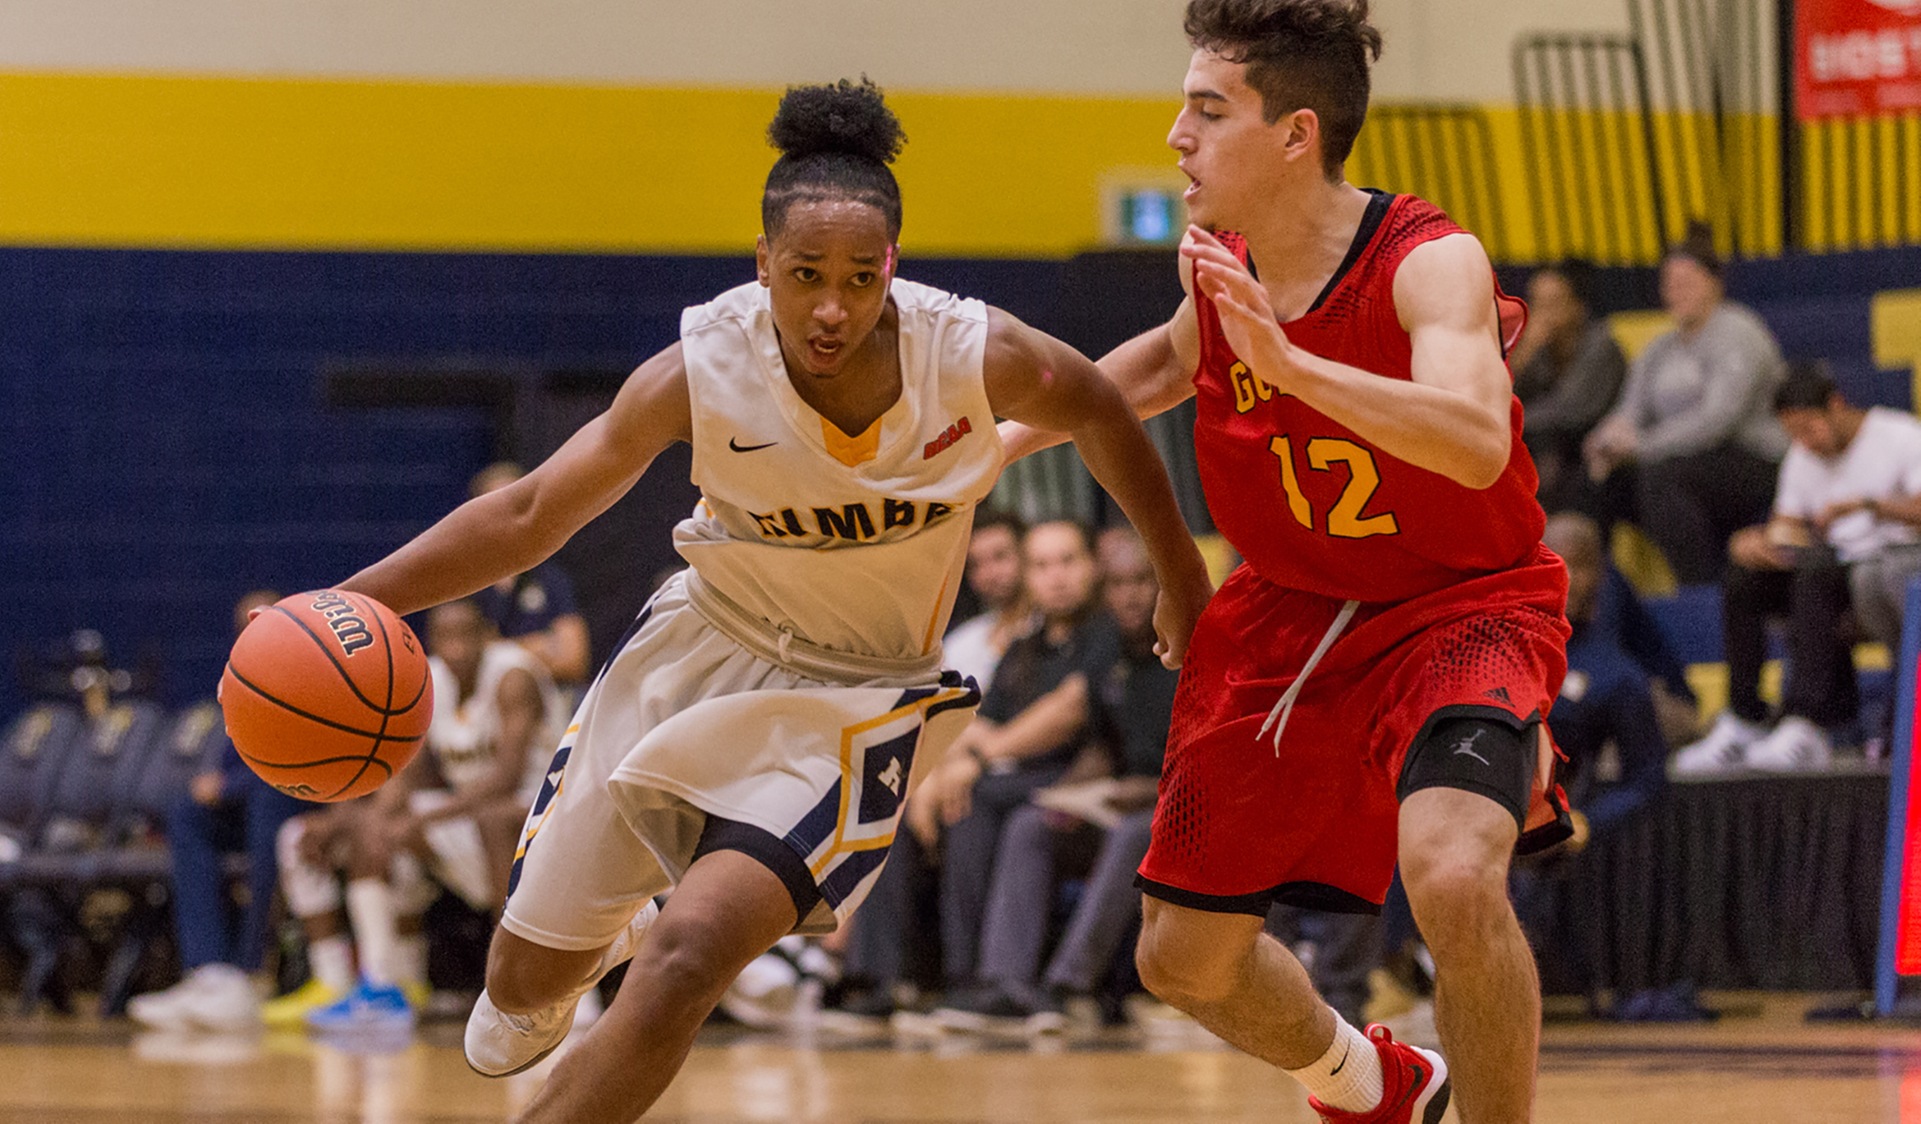 HAWKS DROP TIGHT 89-86 EXHIBITION TILT ON HOME COURT TO U GUELPH